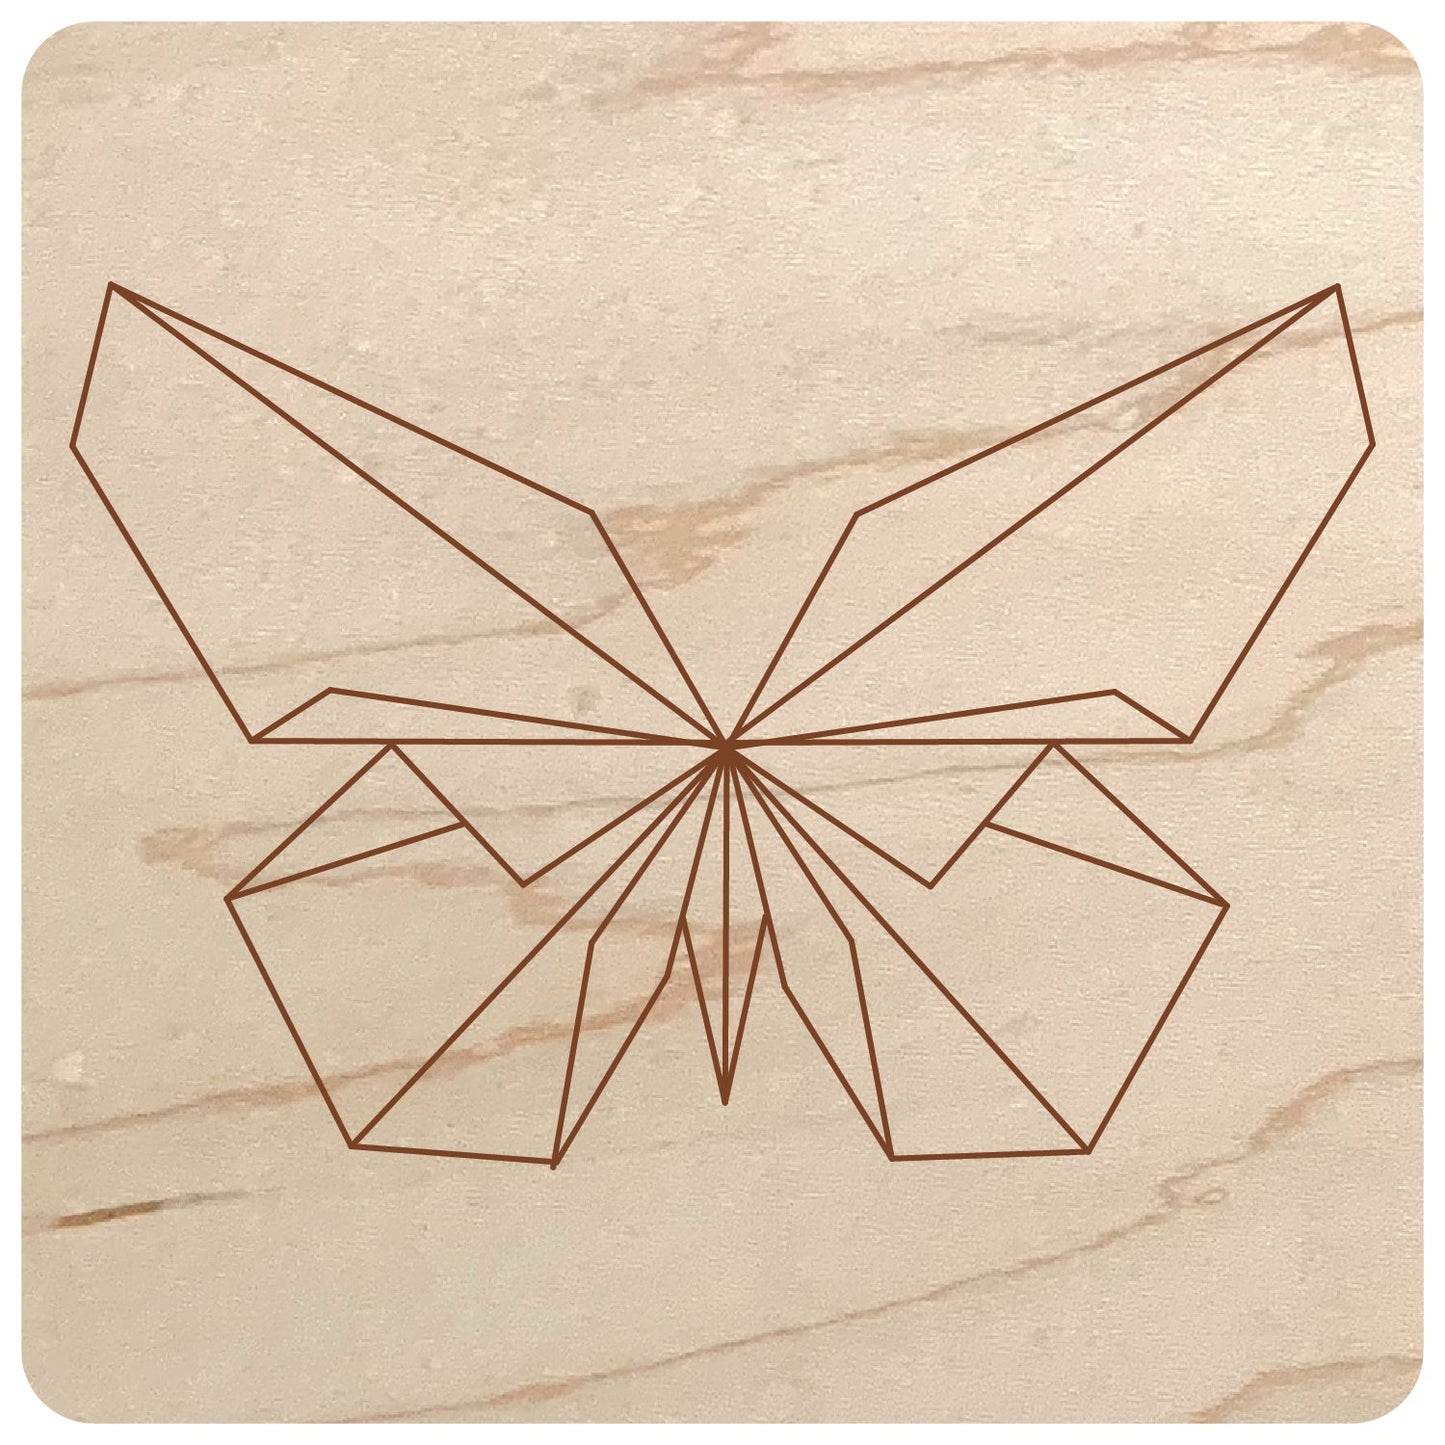 Laser Cut Wood Geometric Design for Wall - geometric butterfly design on maple wood - by LeeMo Designs in Bend, Oregon